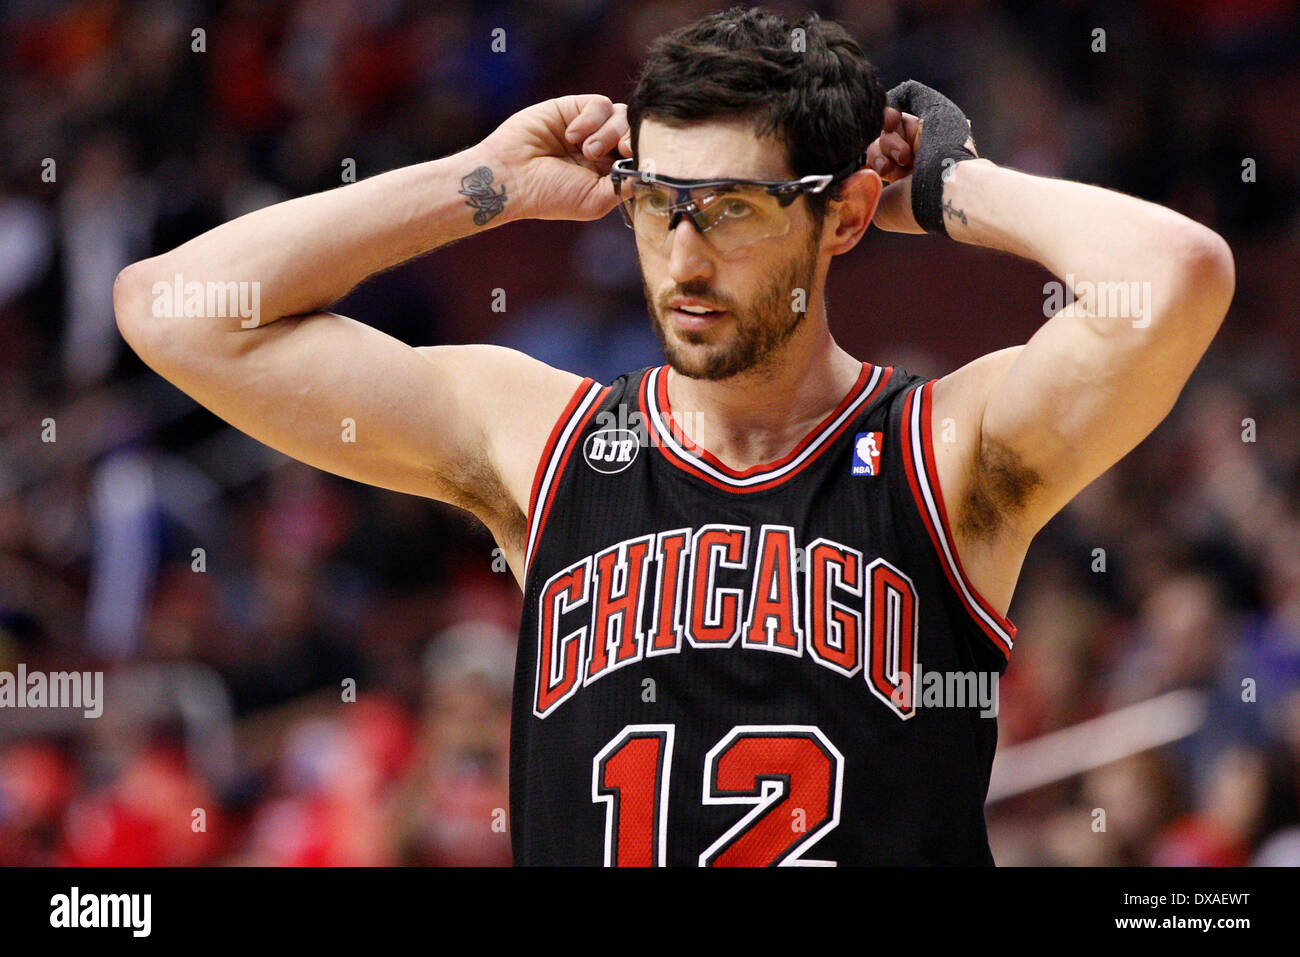 How good of an NBA point guard was Kirk Hinrich? - Quora